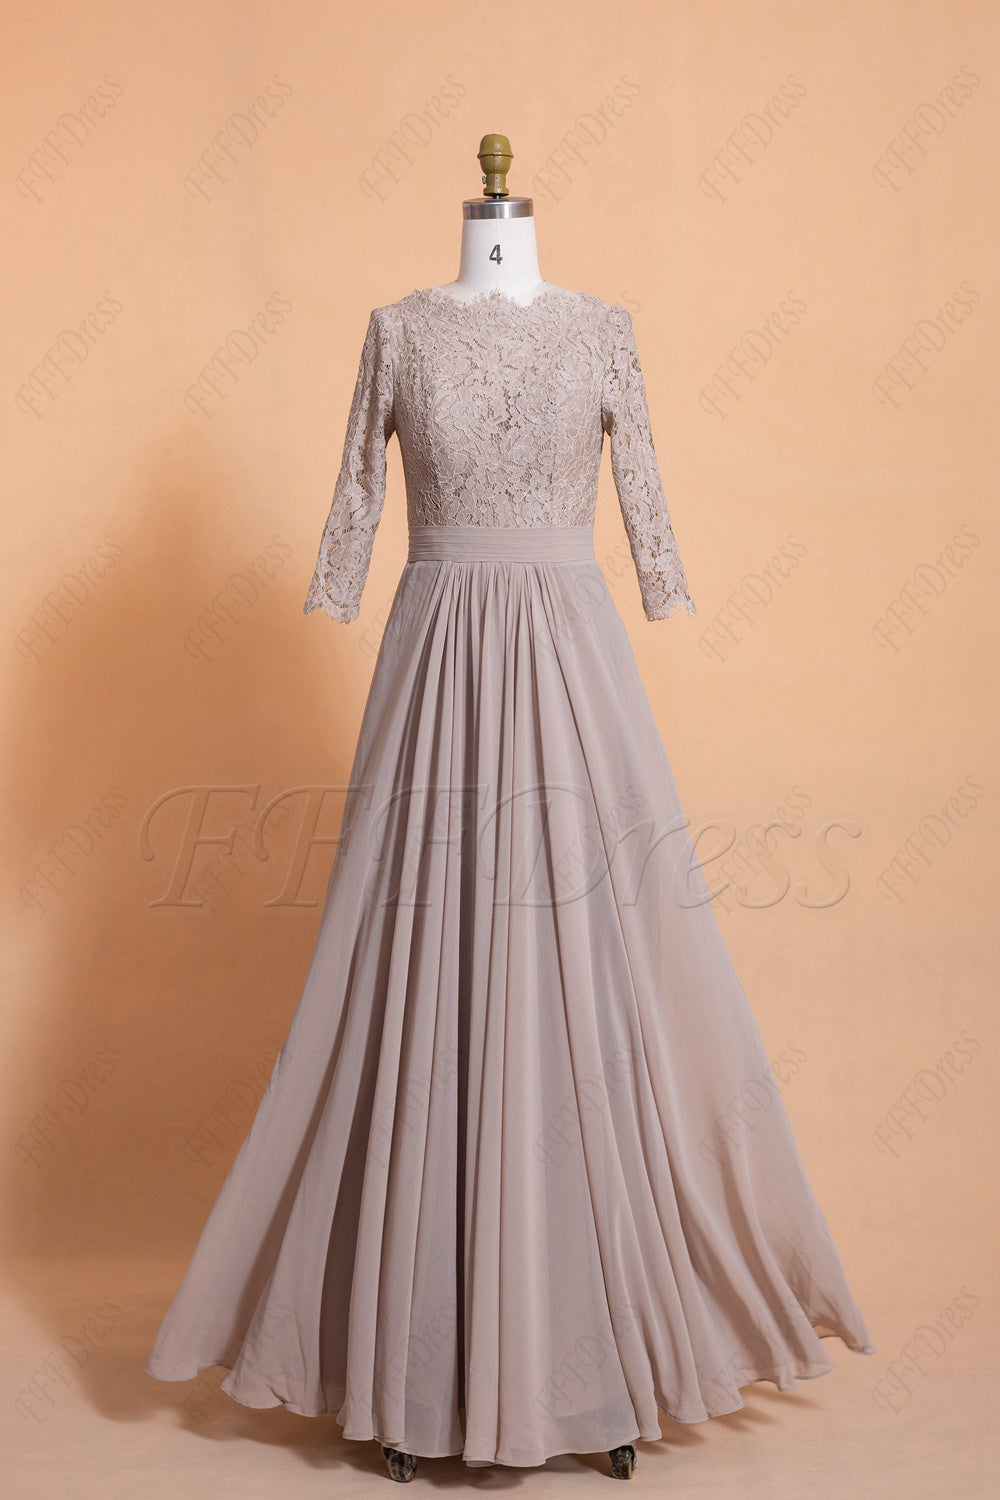 Modest taupe bridesmaid dresses with sleeves